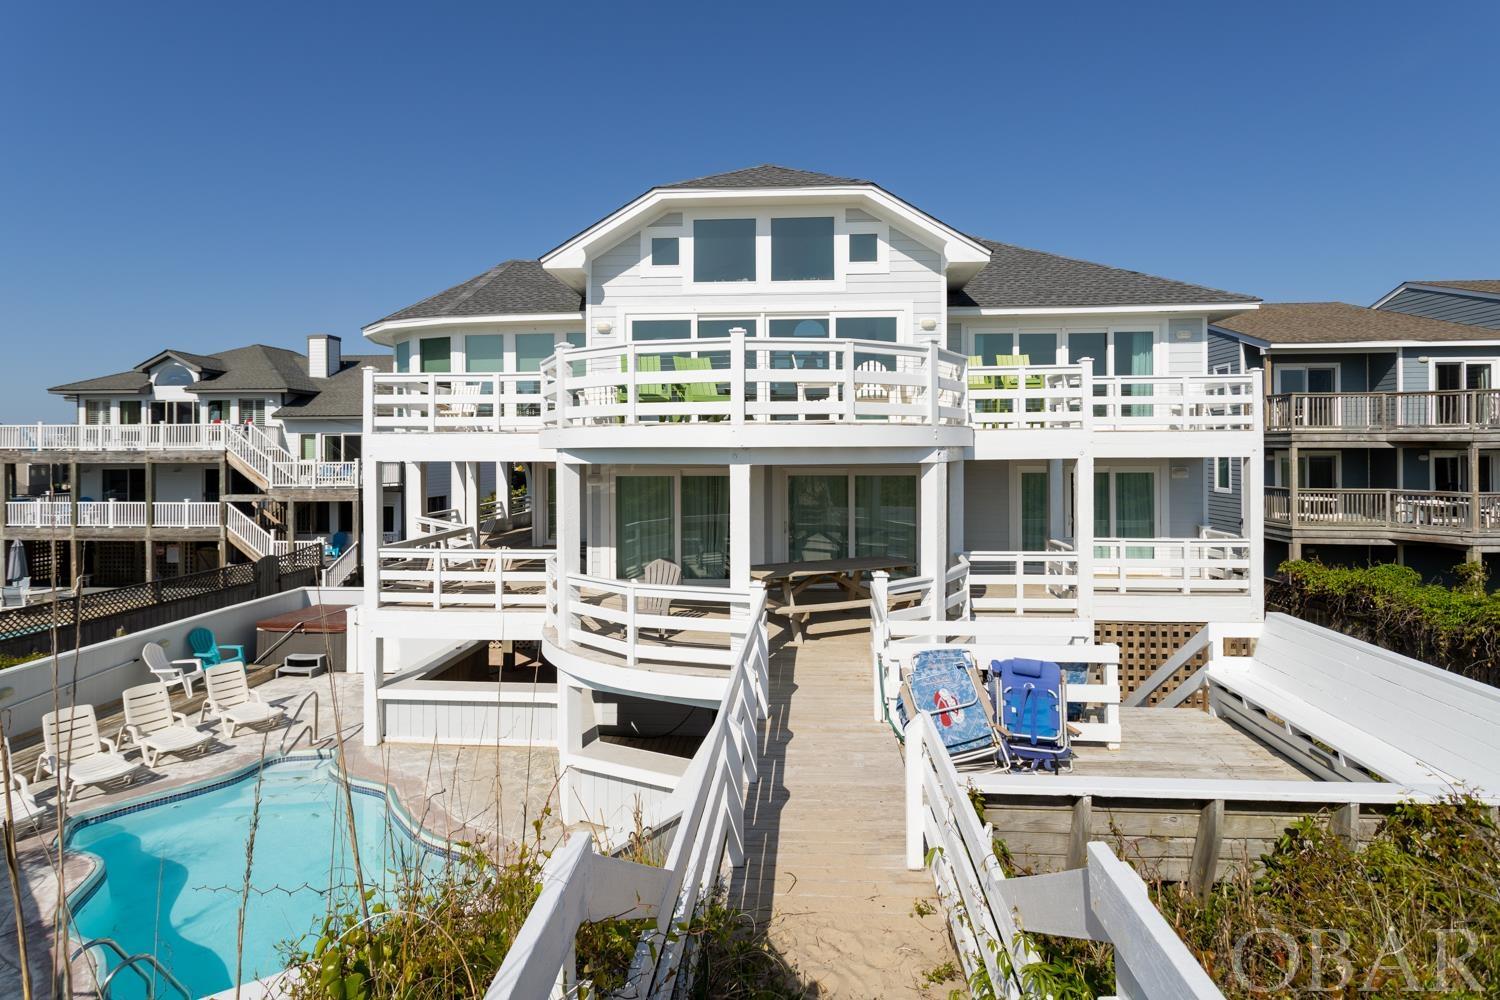 You'll be "Over The Moon" for this incredible updated oceanfront home in Duck with breathtaking ocean views and tons of natural light! A proven rental producer, this home has all of the most sought-after amenities including an elevator, private pool, rec room, and theater room. With over $220k of rental income in 2024 and rental projections as high as $260,000, this house makes for the ideal investment property. Set up in a reverse floor plan, the top level has the “wow factor" with panoramic ocean views from every angle. The open floor plan flows seamlessly between the great room, kitchen, and dining area, and up to a west-facing ship's watch. The large upstairs primary bedroom has deck access and views of the ocean from bed. The middle level comes equipped with four bedrooms, all of which have deck access and two that are ensuite. The ground level is full of fun for everyone to enjoy rain or shine. A large rec room with pool table and foosball connects to the fully equipped theater room with tiered seating. Outside is your own little private oasis with a pool, hot tub, and plenty of room to lounge whether you prefer the sun or the shade. Take a few steps over the beach walkway right to the beach. In the last four years, significant updates to the home have been completed such as two new HVAC systems, new flooring throughout, interior/exterior paint, new high-end mattresses and furniture, a new roof, a new outdoor bar, and new outdoor furniture, just to name a few. Pre-listing home inspection on file. Don’t let this one get away!